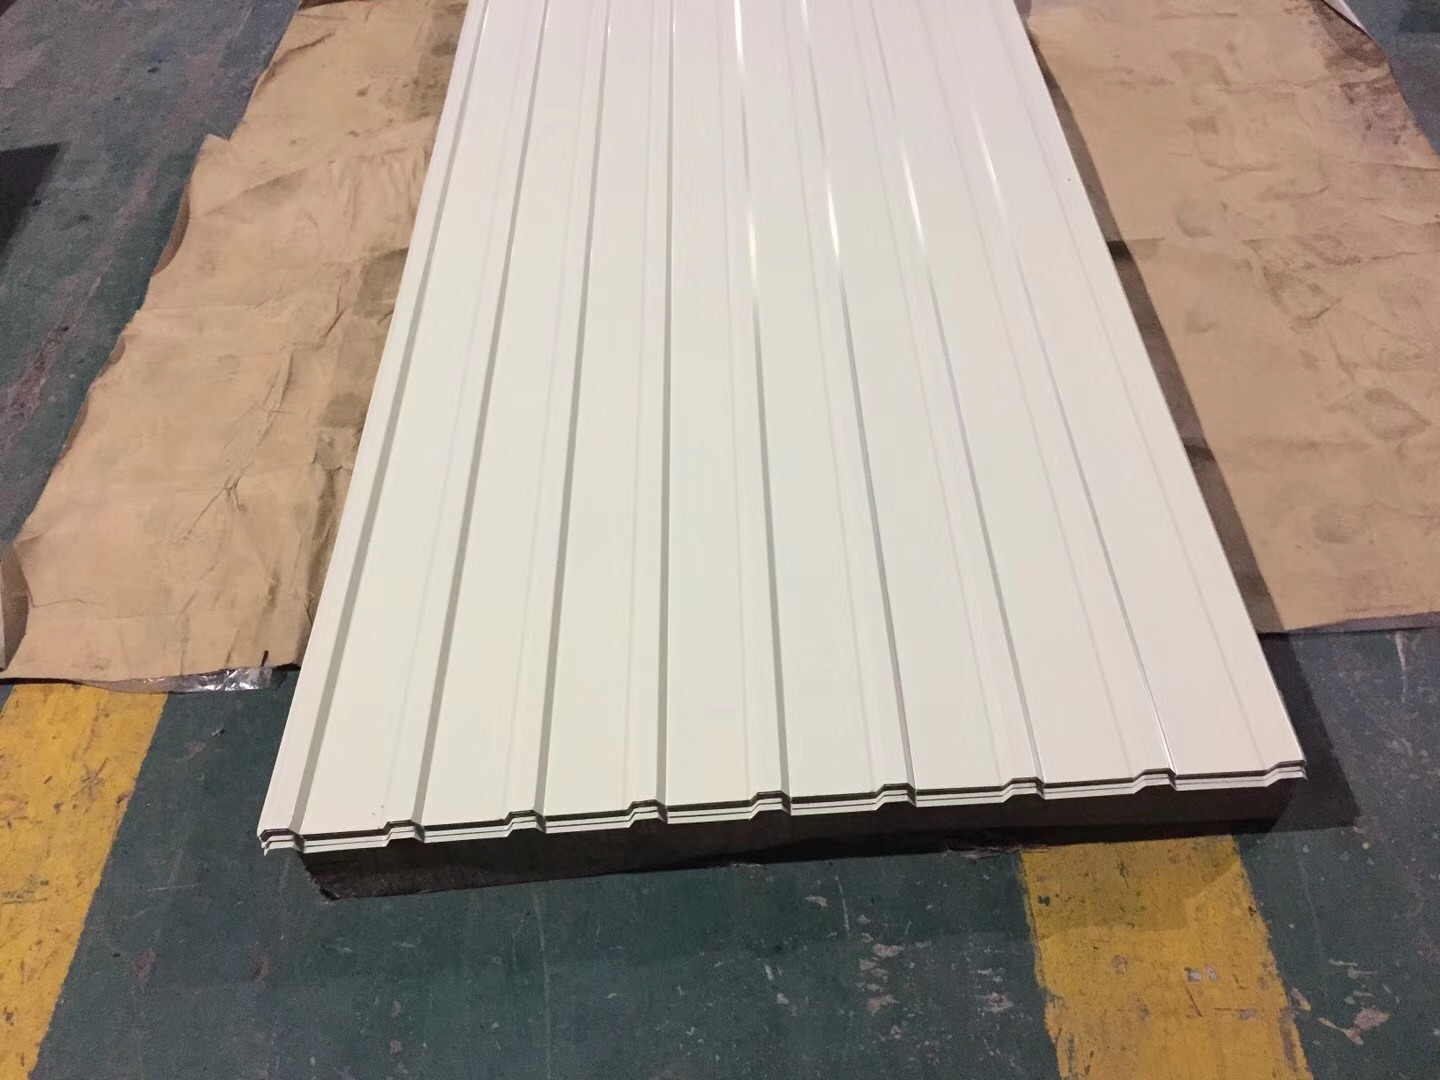 Quality 26 Gauge Thick Pre-painted Aluminum Used For Roofing Corrugated Sheet for sale